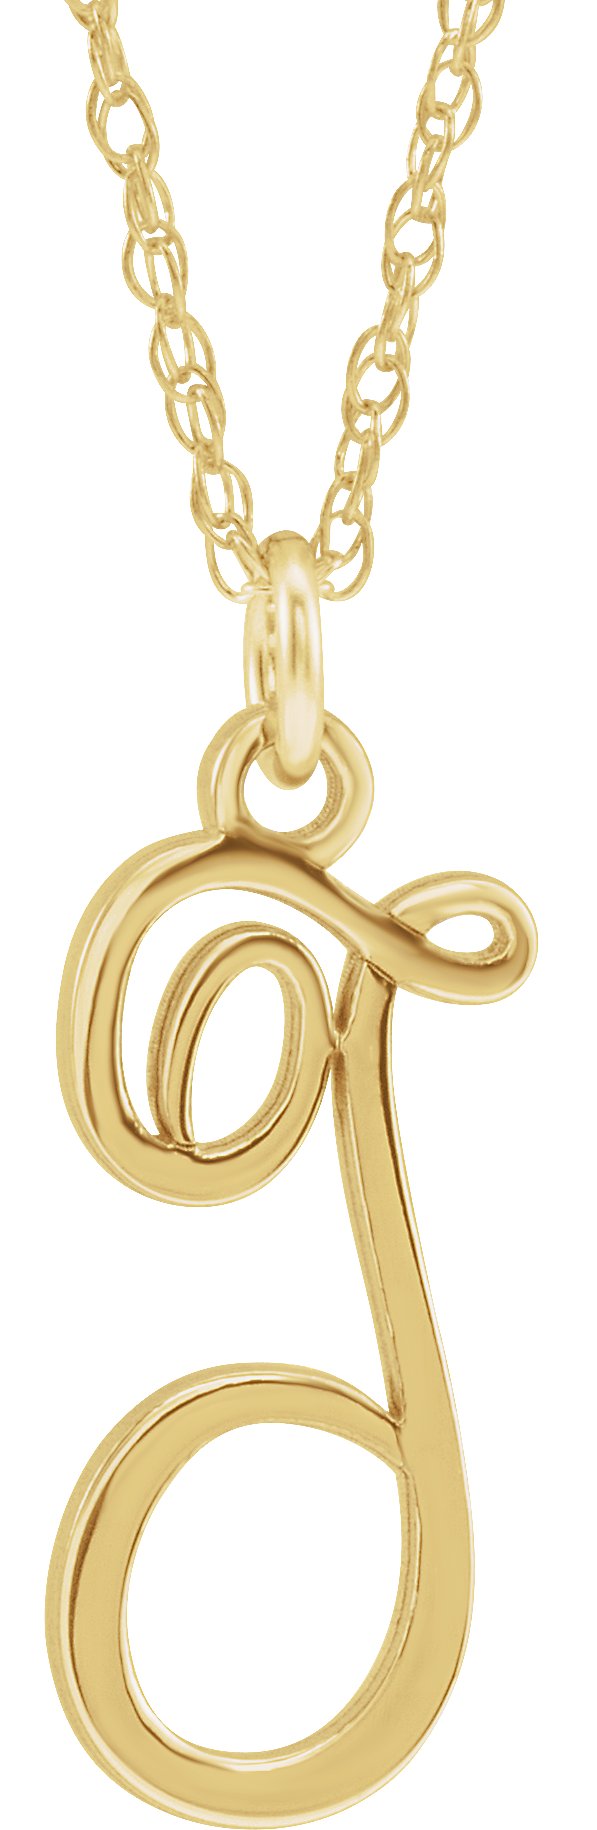 14K Yellow Gold-Plated Sterling Silver Script Initial T 16-18" Necklace